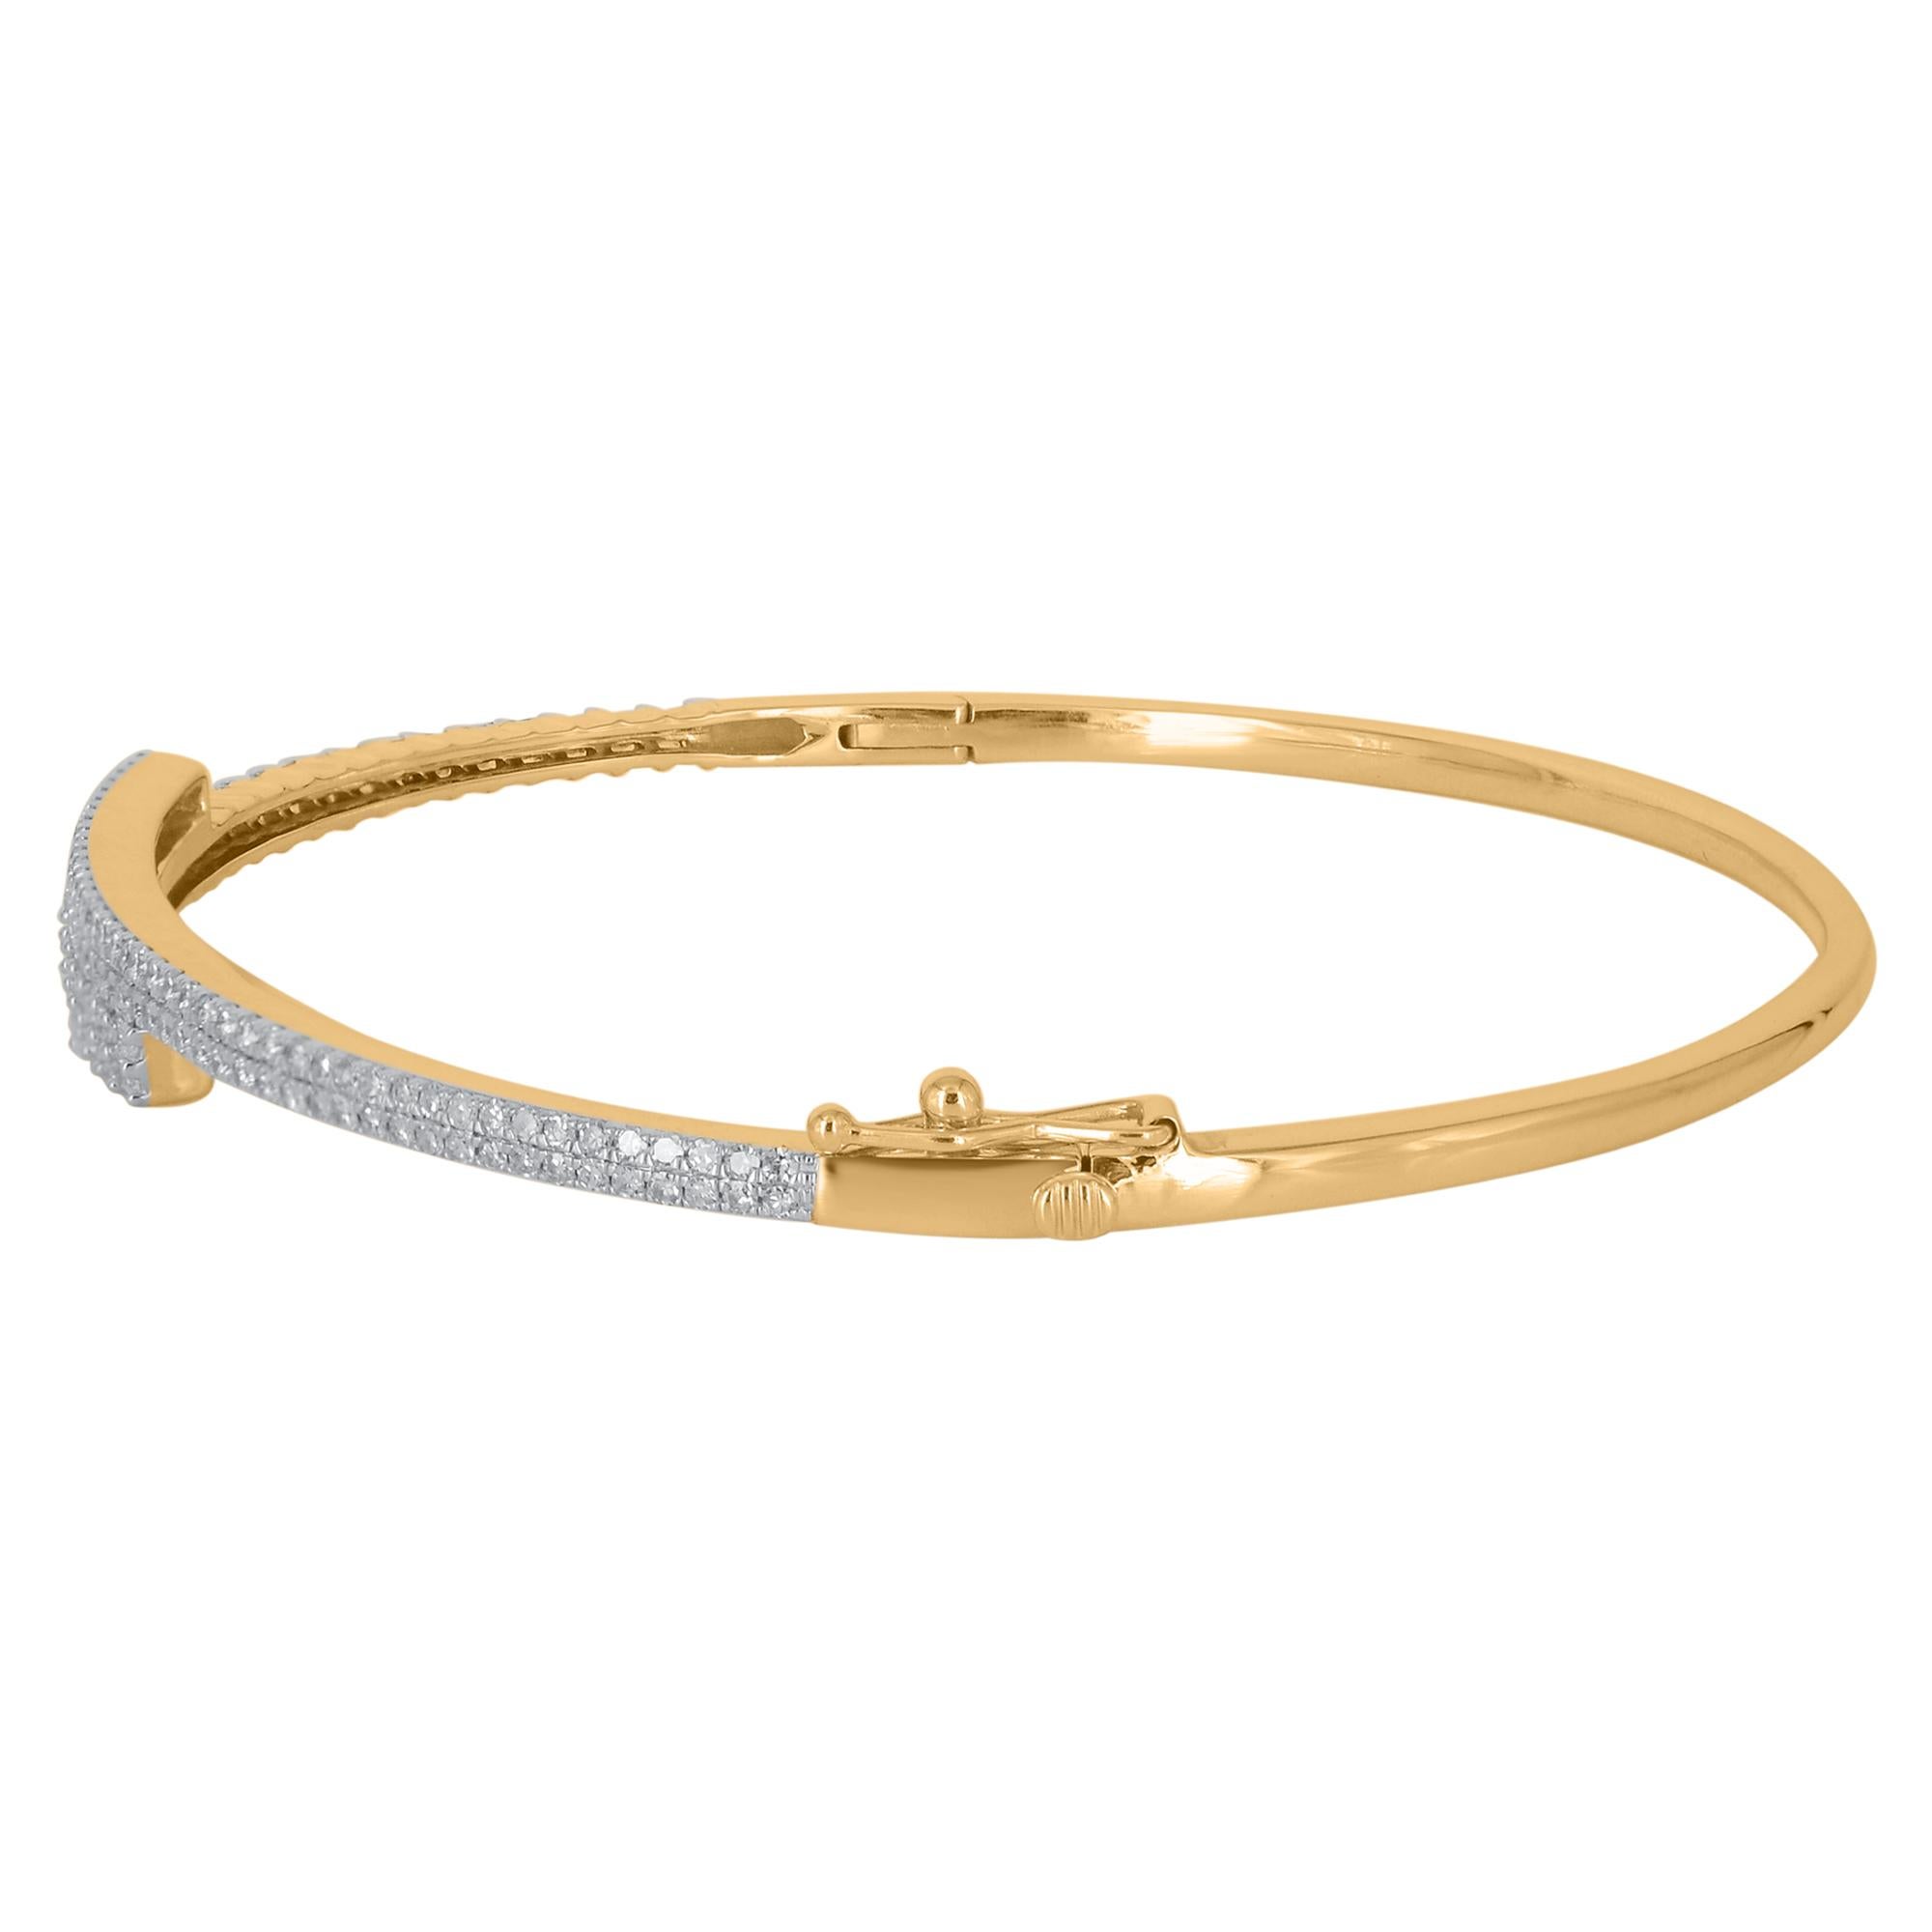 Add a sweet touch to all your favourite looks with this subtle diamond bangle bracelet. This Shimmering bangle bracelet features 142 natural single cut, brilliant cut & baguette diamonds in prong setting and crafted in 14kt yellow gold. Diamonds are